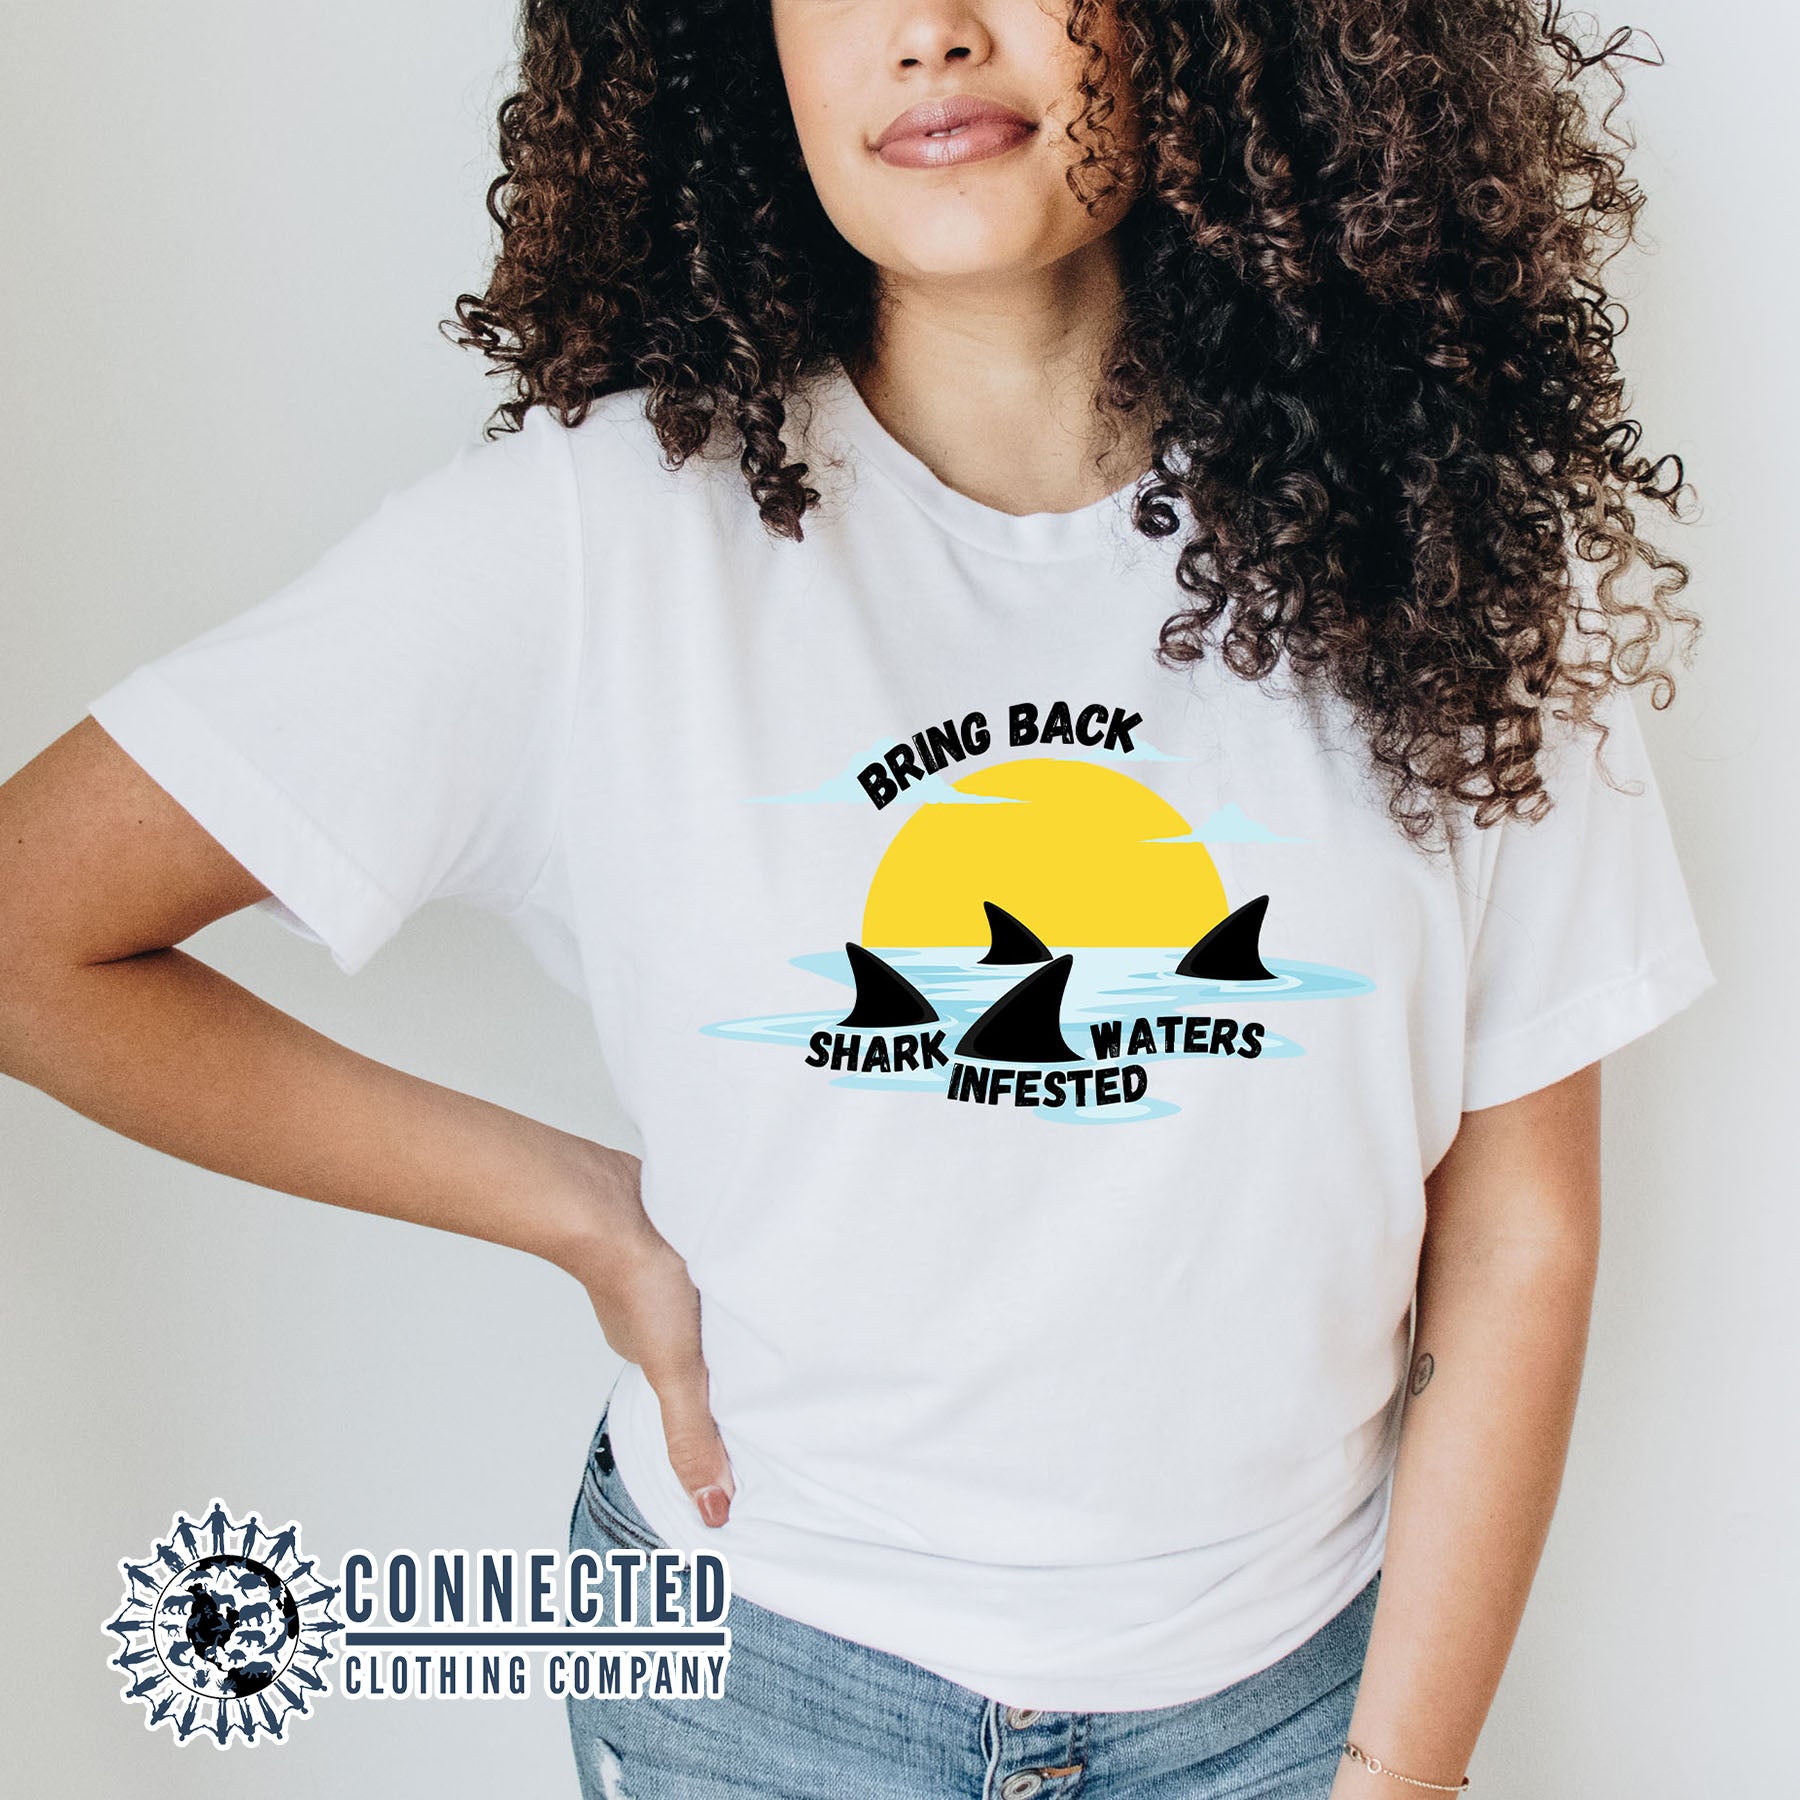 Model Wearing White Bring Back Shark Infested Waters Unisex Short-Sleeve Tee - Connected Clothing Company - Ethically and Sustainably Made - 10% of profits donated to shark conservation and ocean conservation